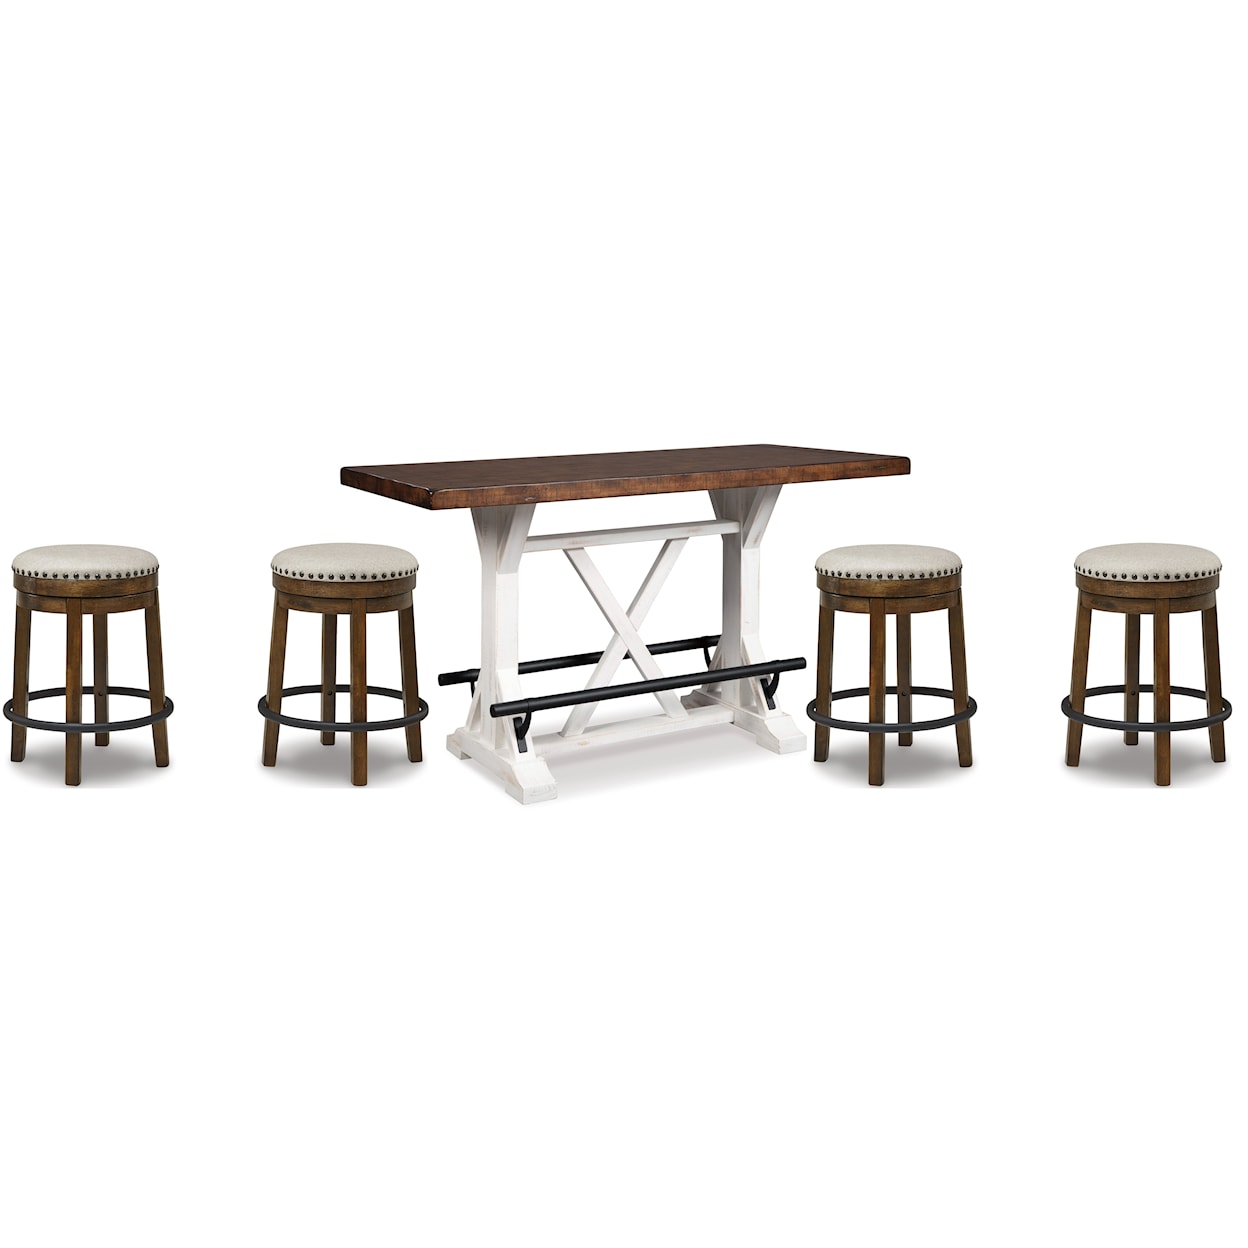 Signature Design by Ashley Valebeck Table and 4 Stools